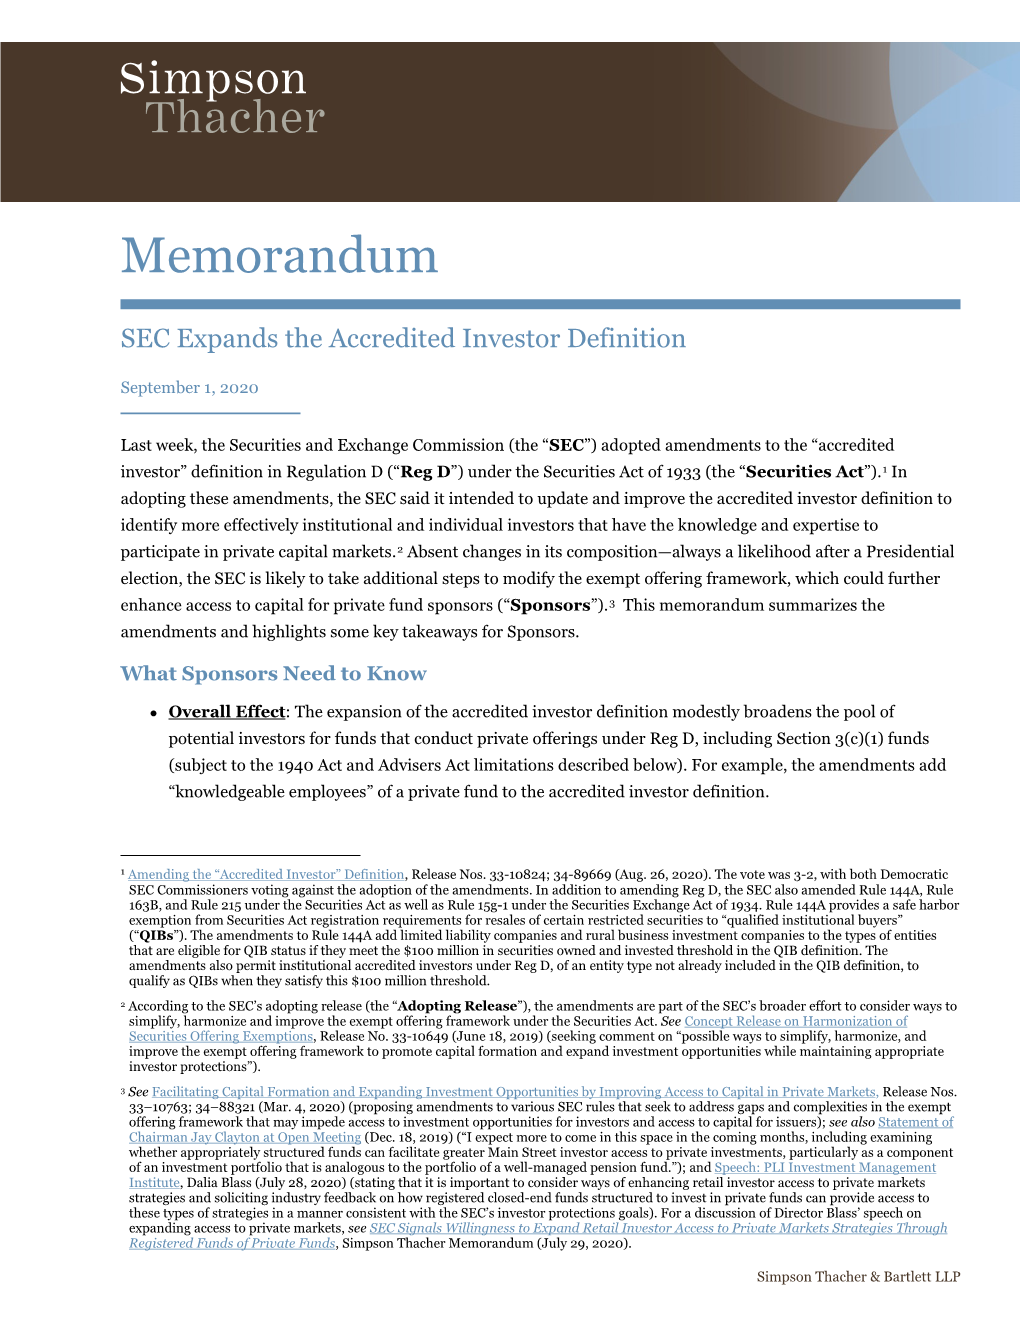 SEC Expands the Accredited Investor Definition